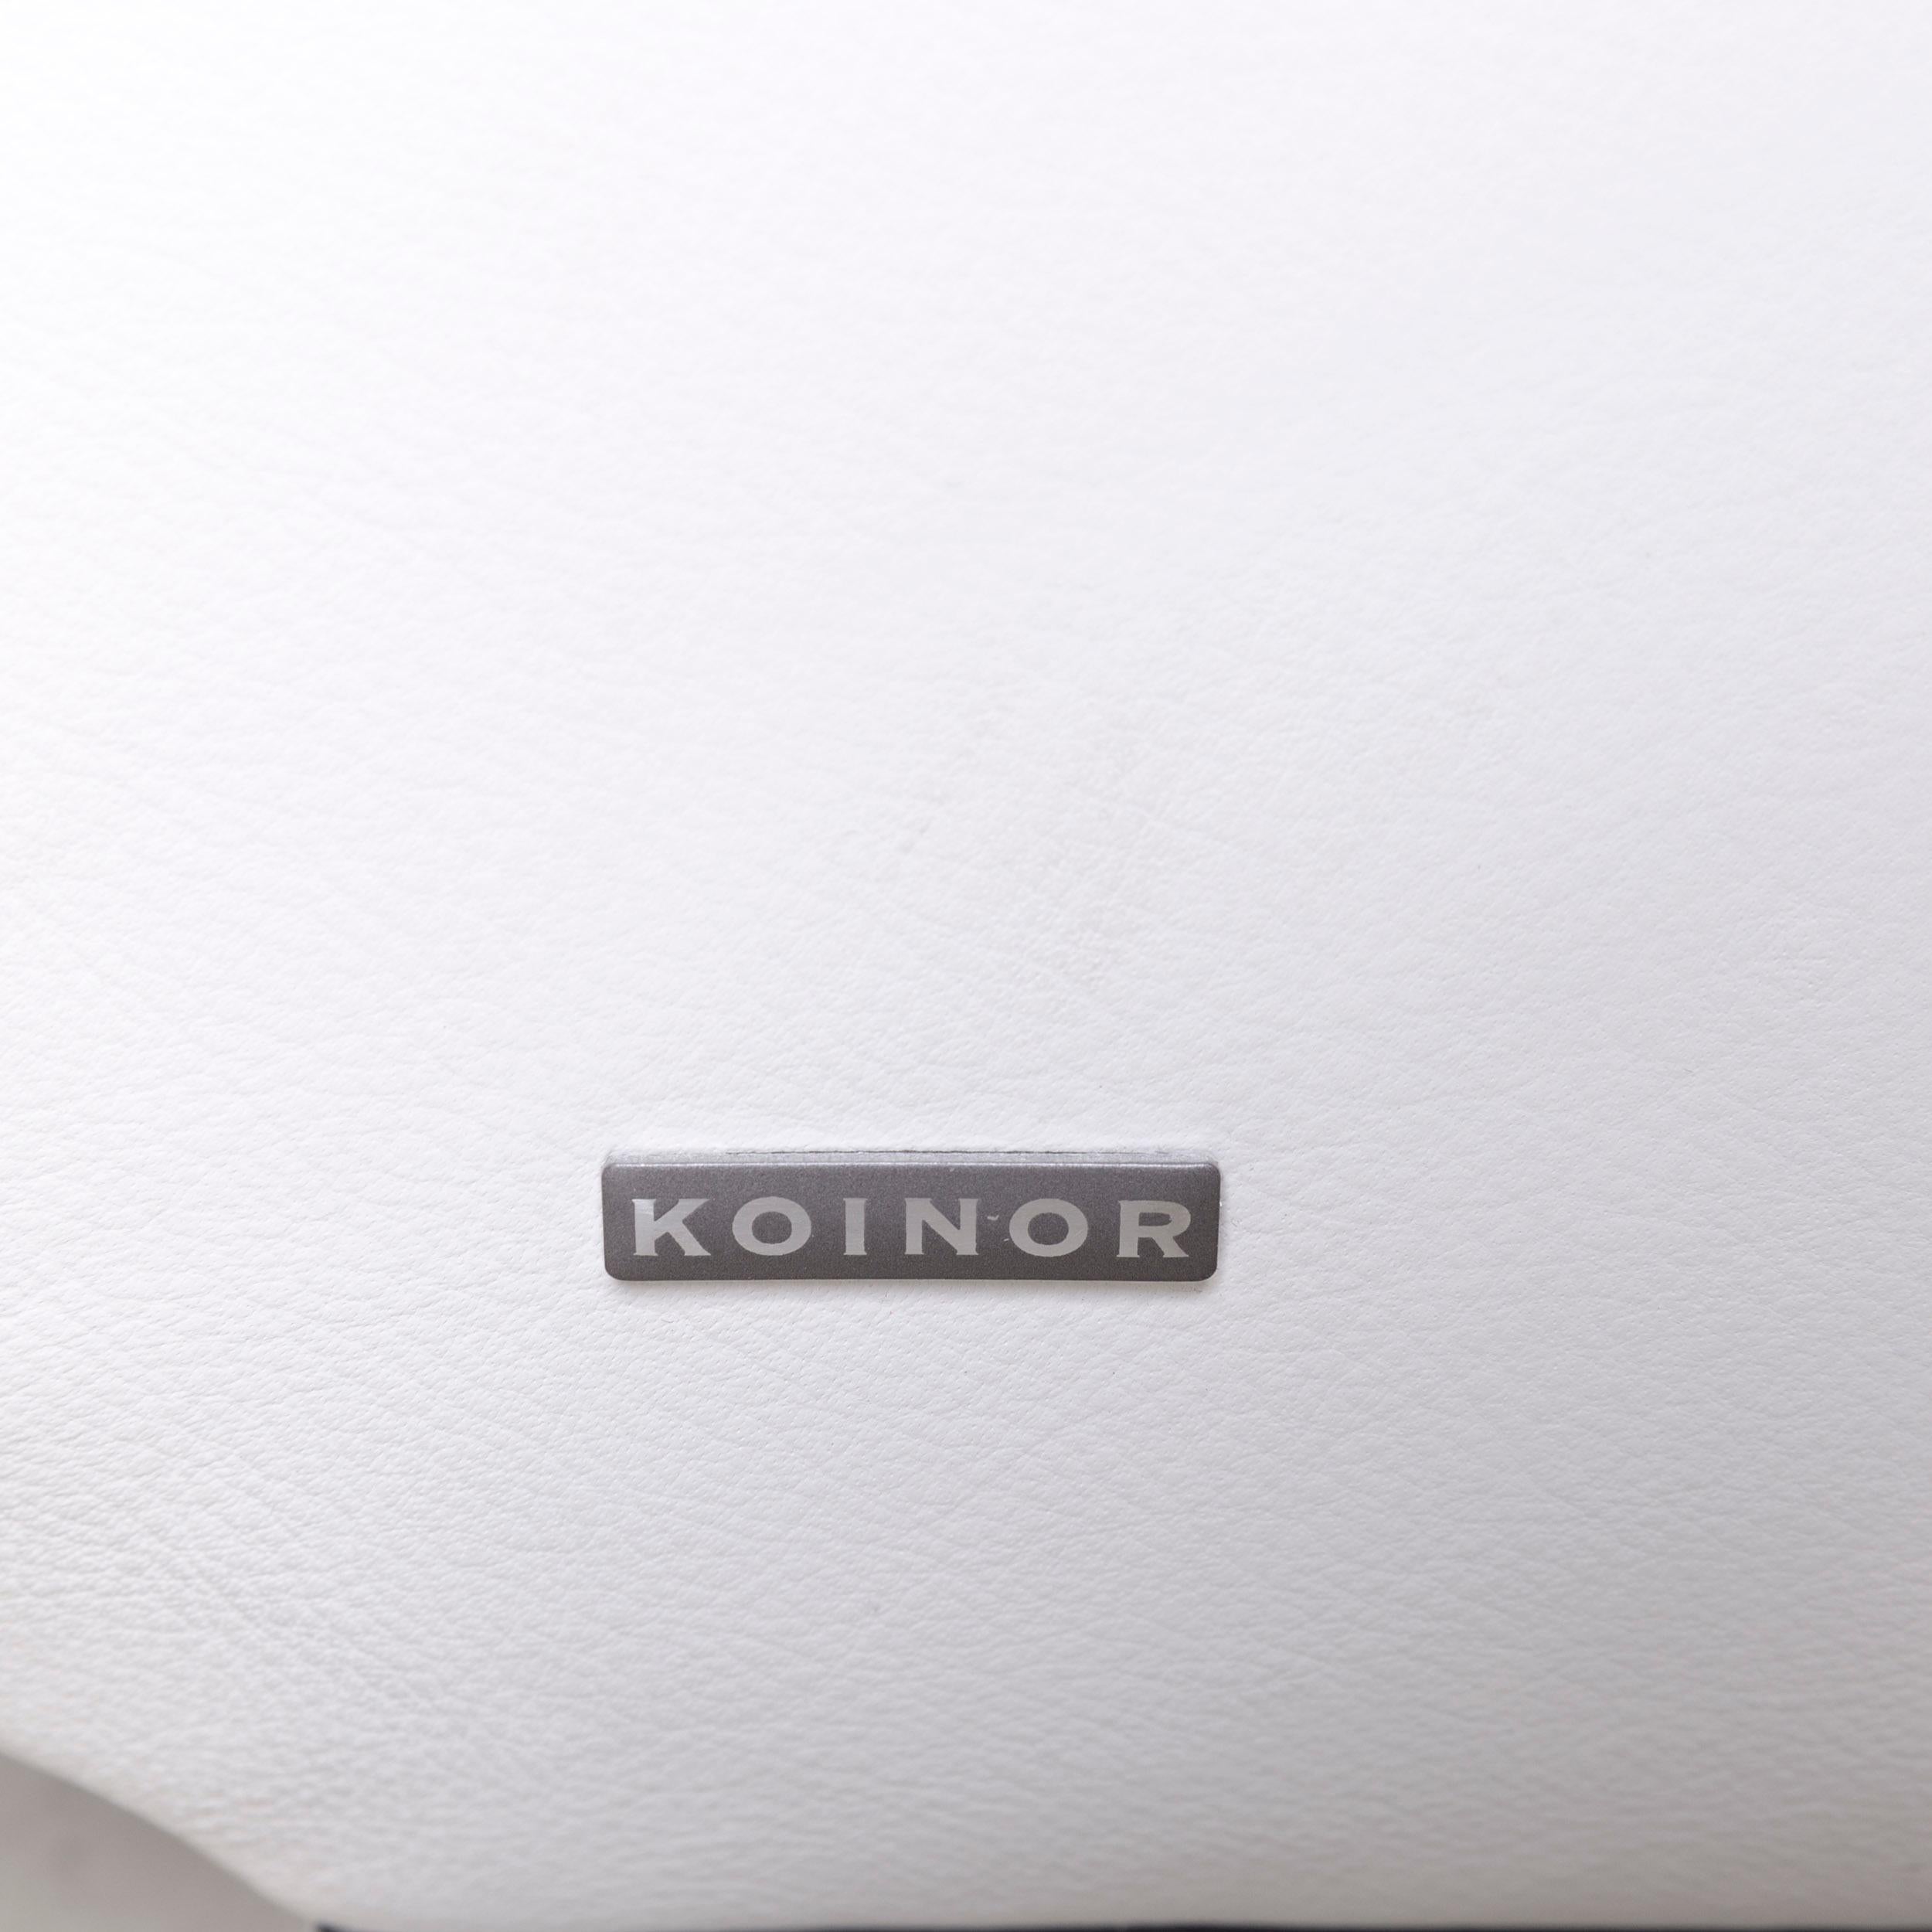 Koinor Volare Designer Leather Sofa White Two-Seat Couch For Sale 3